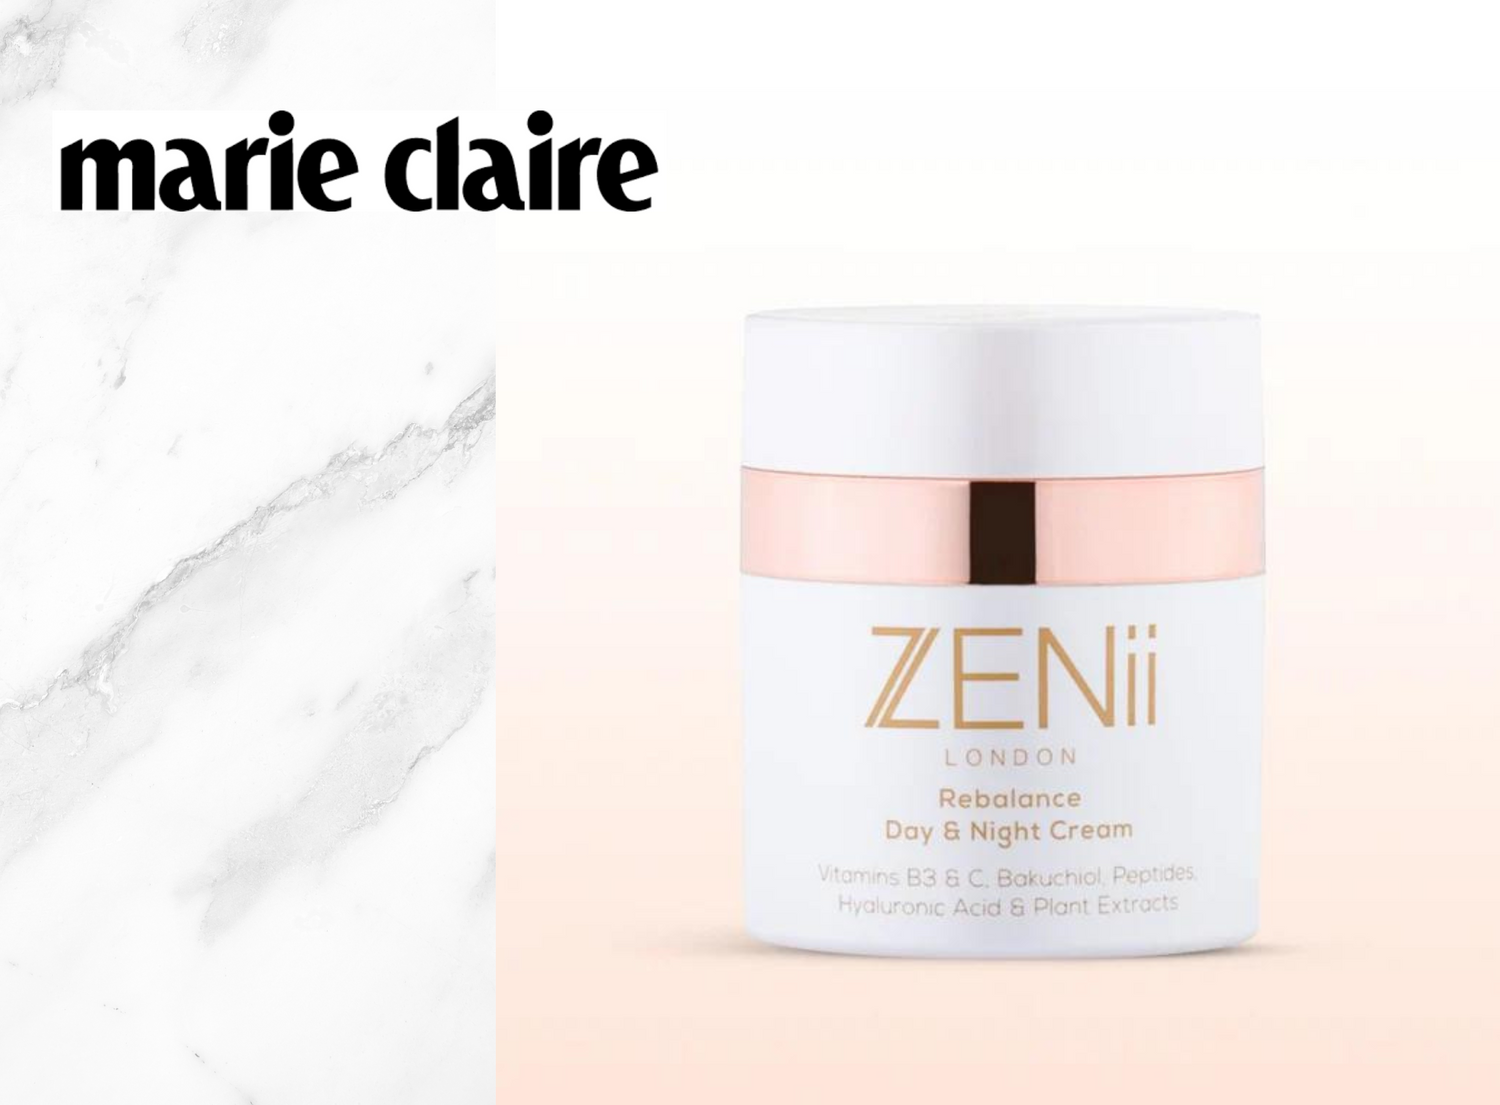 Rebalance - Featured in Marie Claire